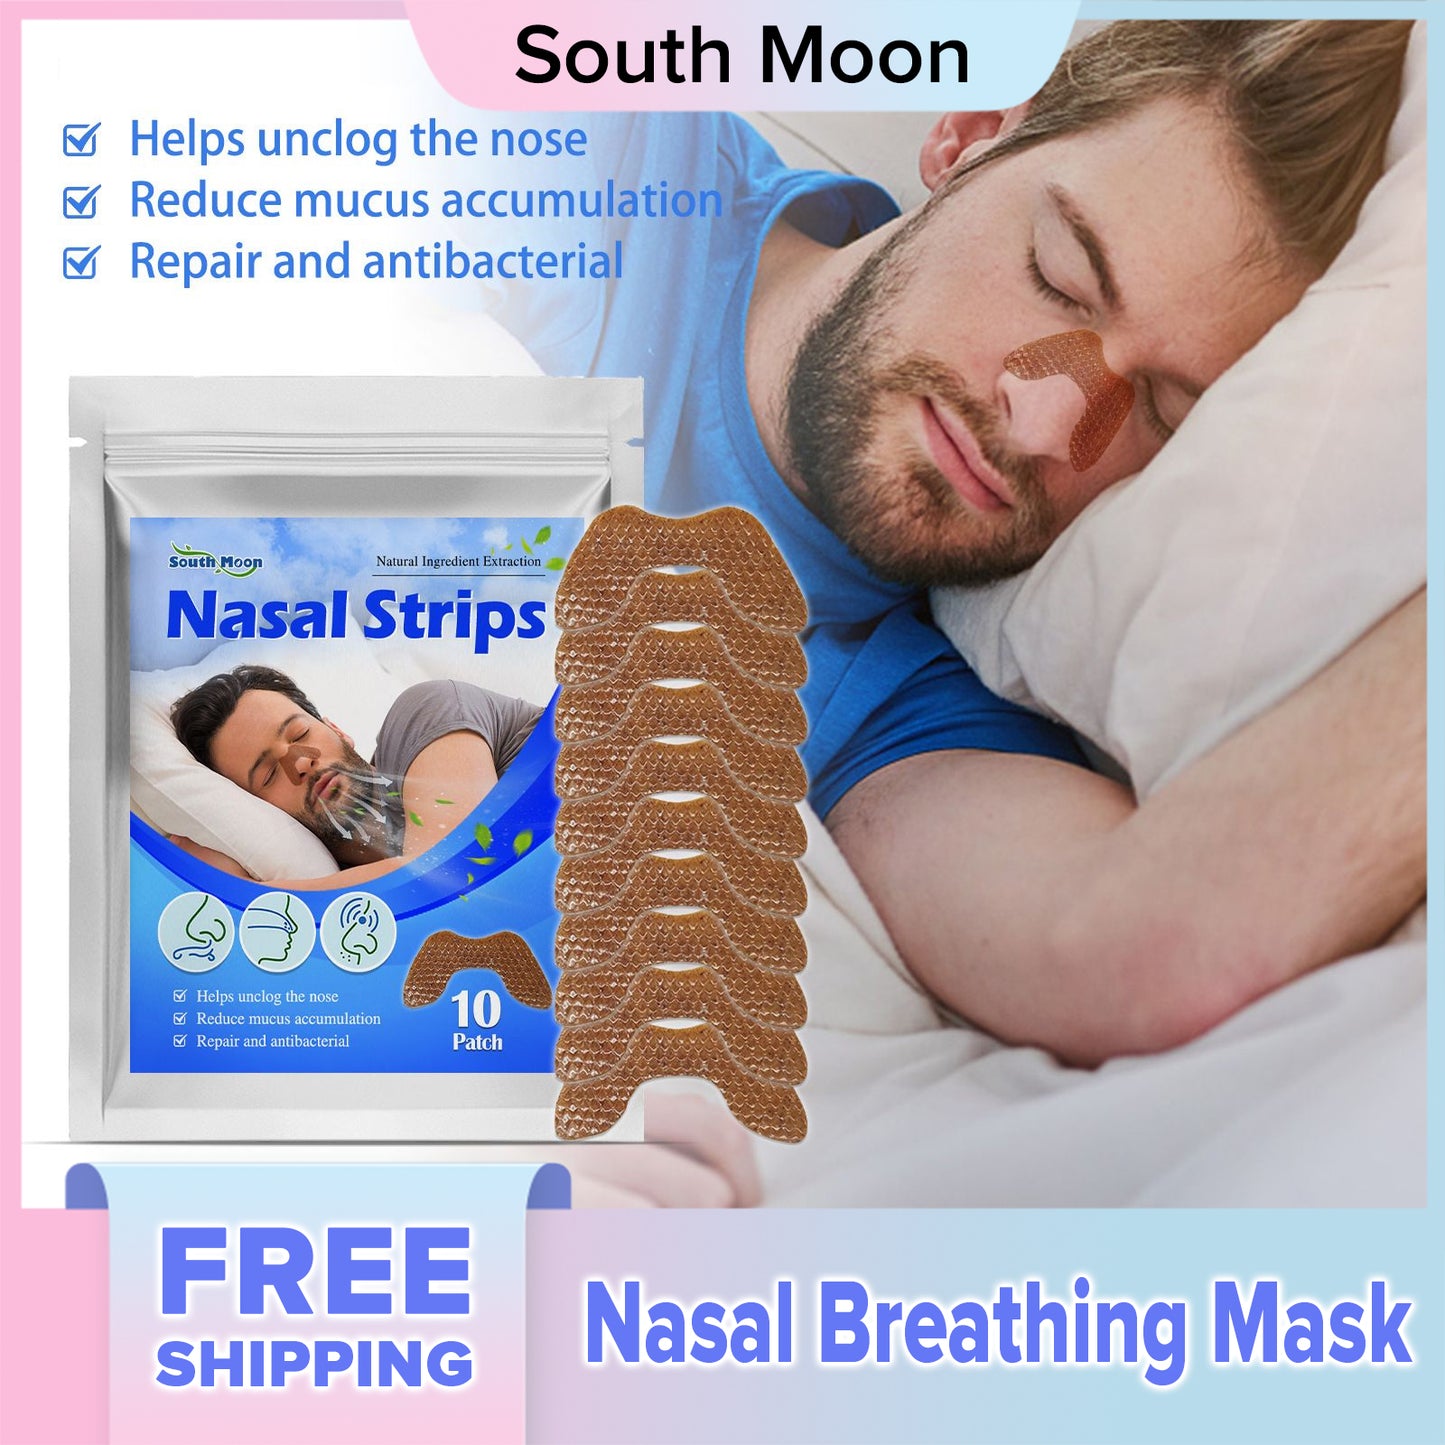 South Moon Nasal Breathing Mask For Physical Expansion Of Noses, Stasis Of Nasal Muzzle, Obstruction Of Breathing, Snoring Stopping, And Cooling Nose Mask (10pcs)